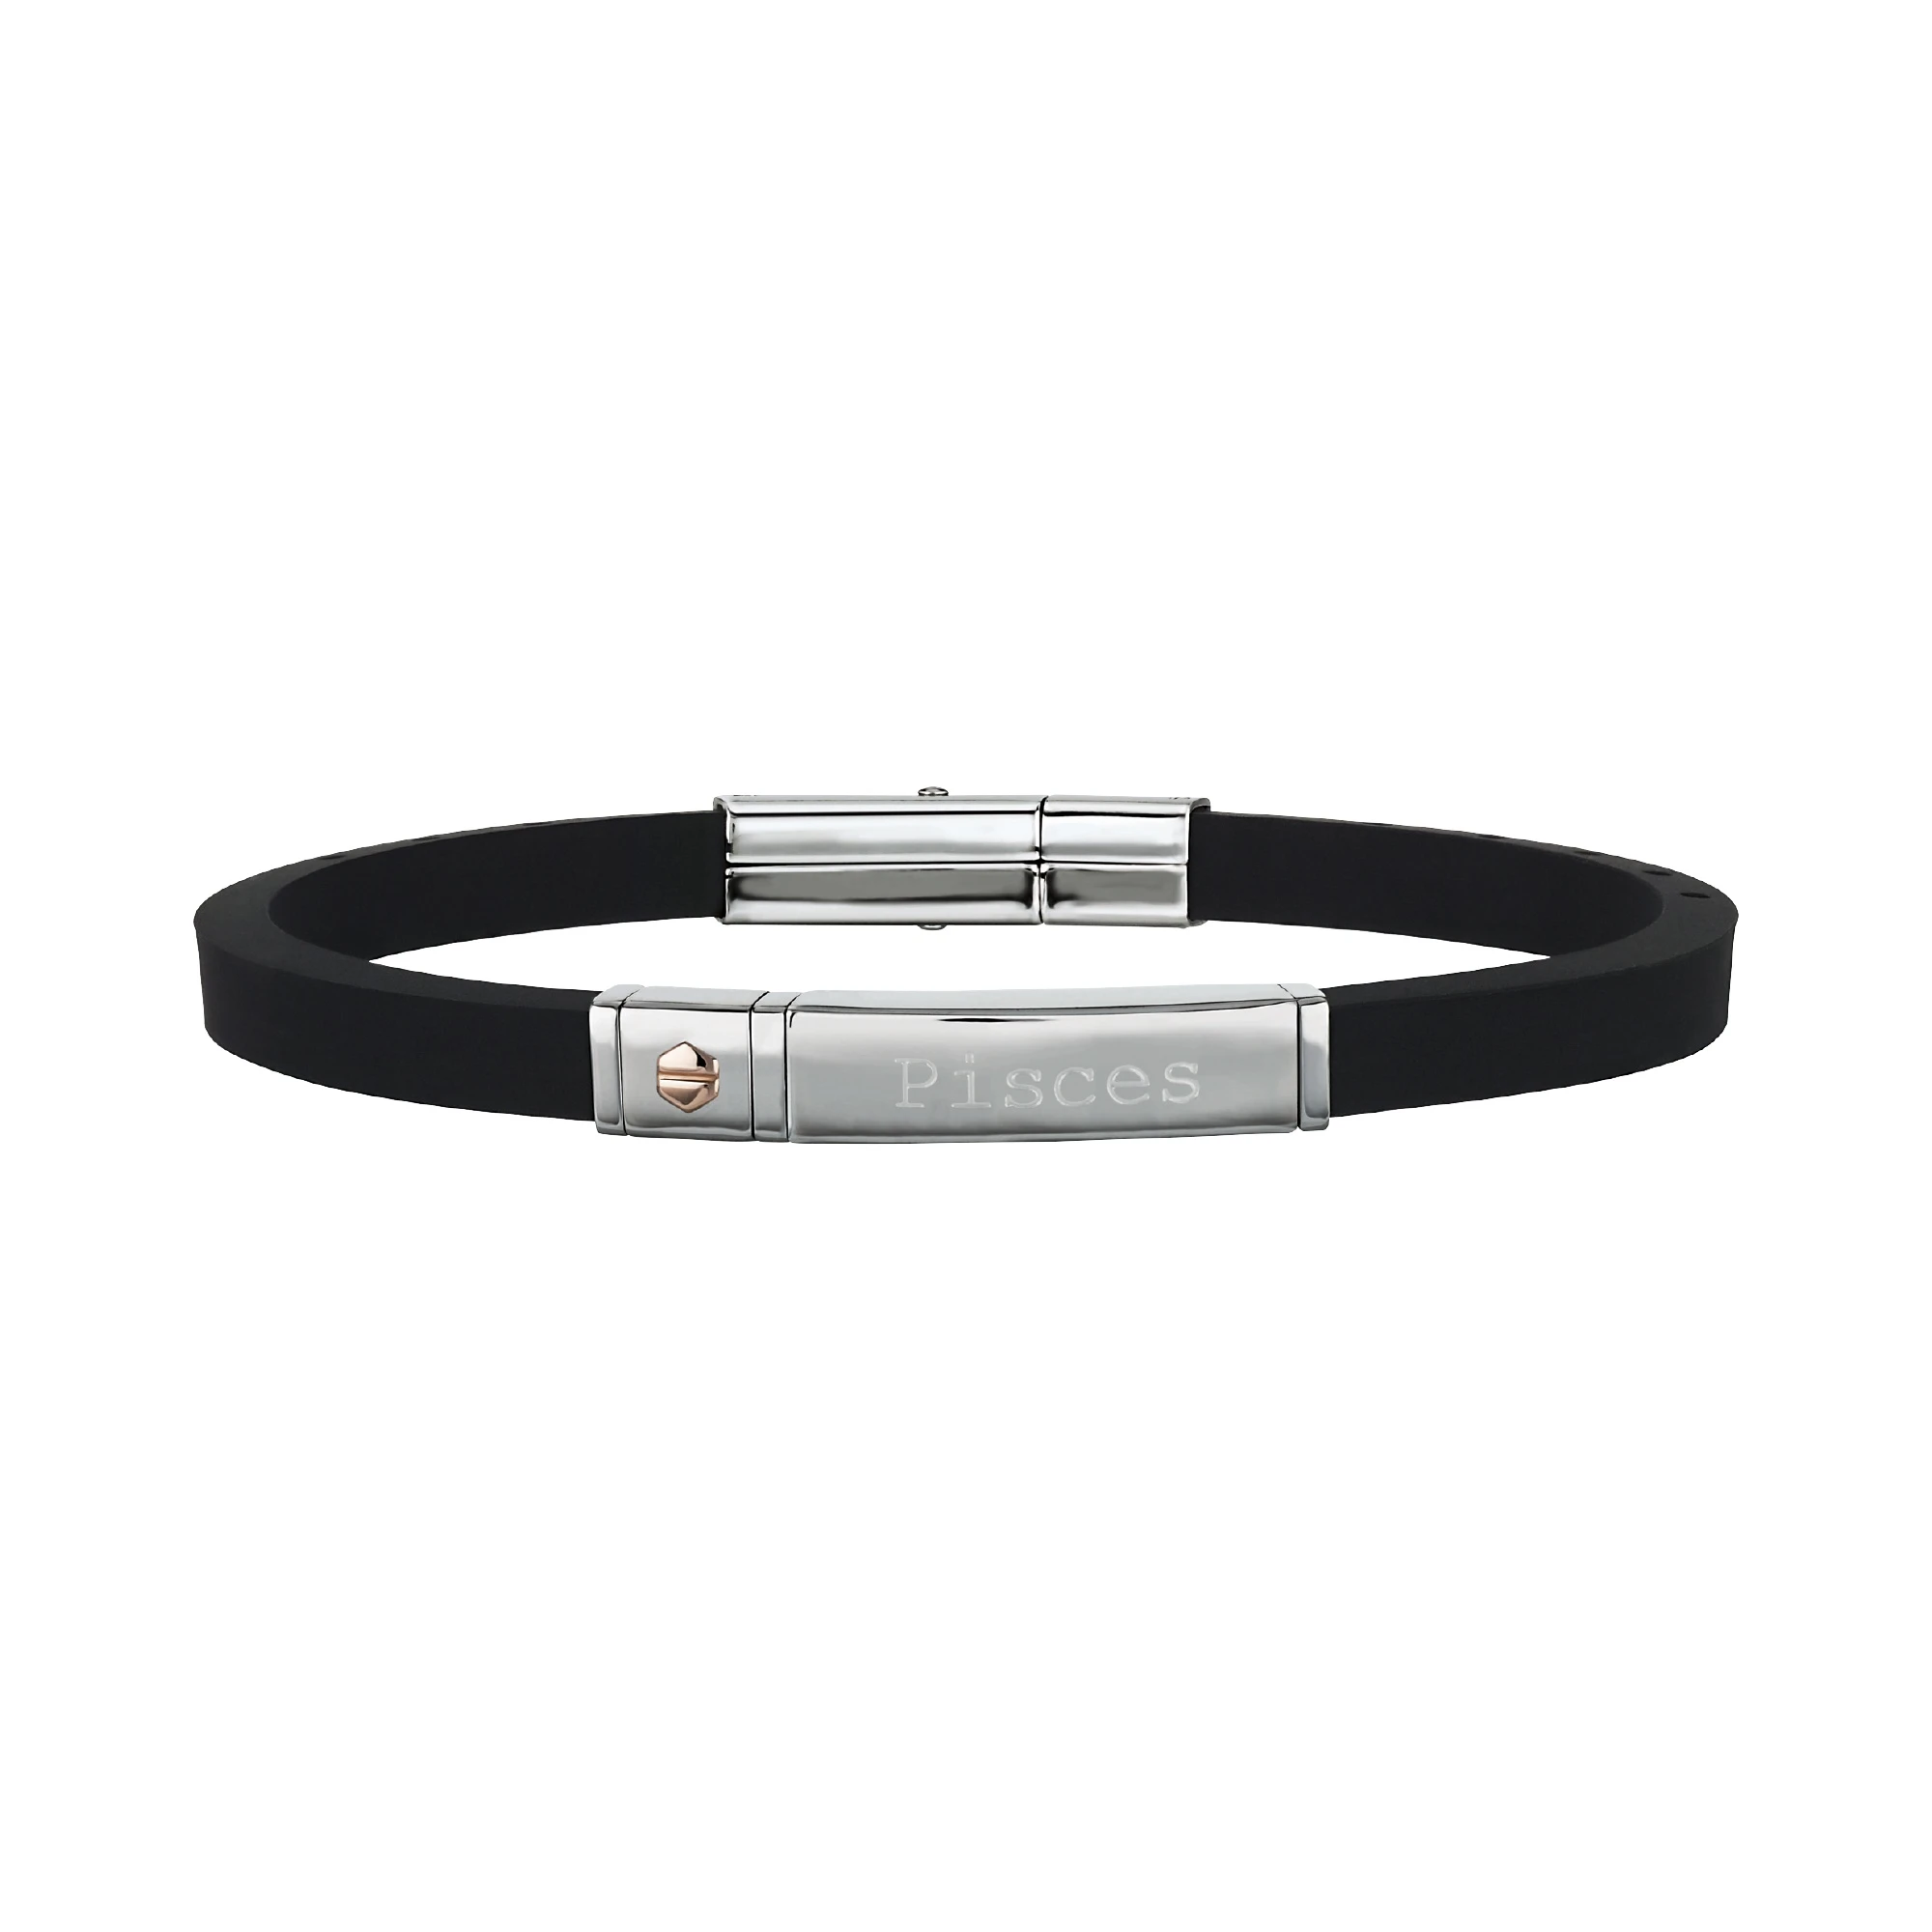 ZODIAC - BLACK SILICON AND STAINLESS STEEL BRACELET WITH A 9K IP ROSE ELEMENT - 1 - TJ2305 | Breil